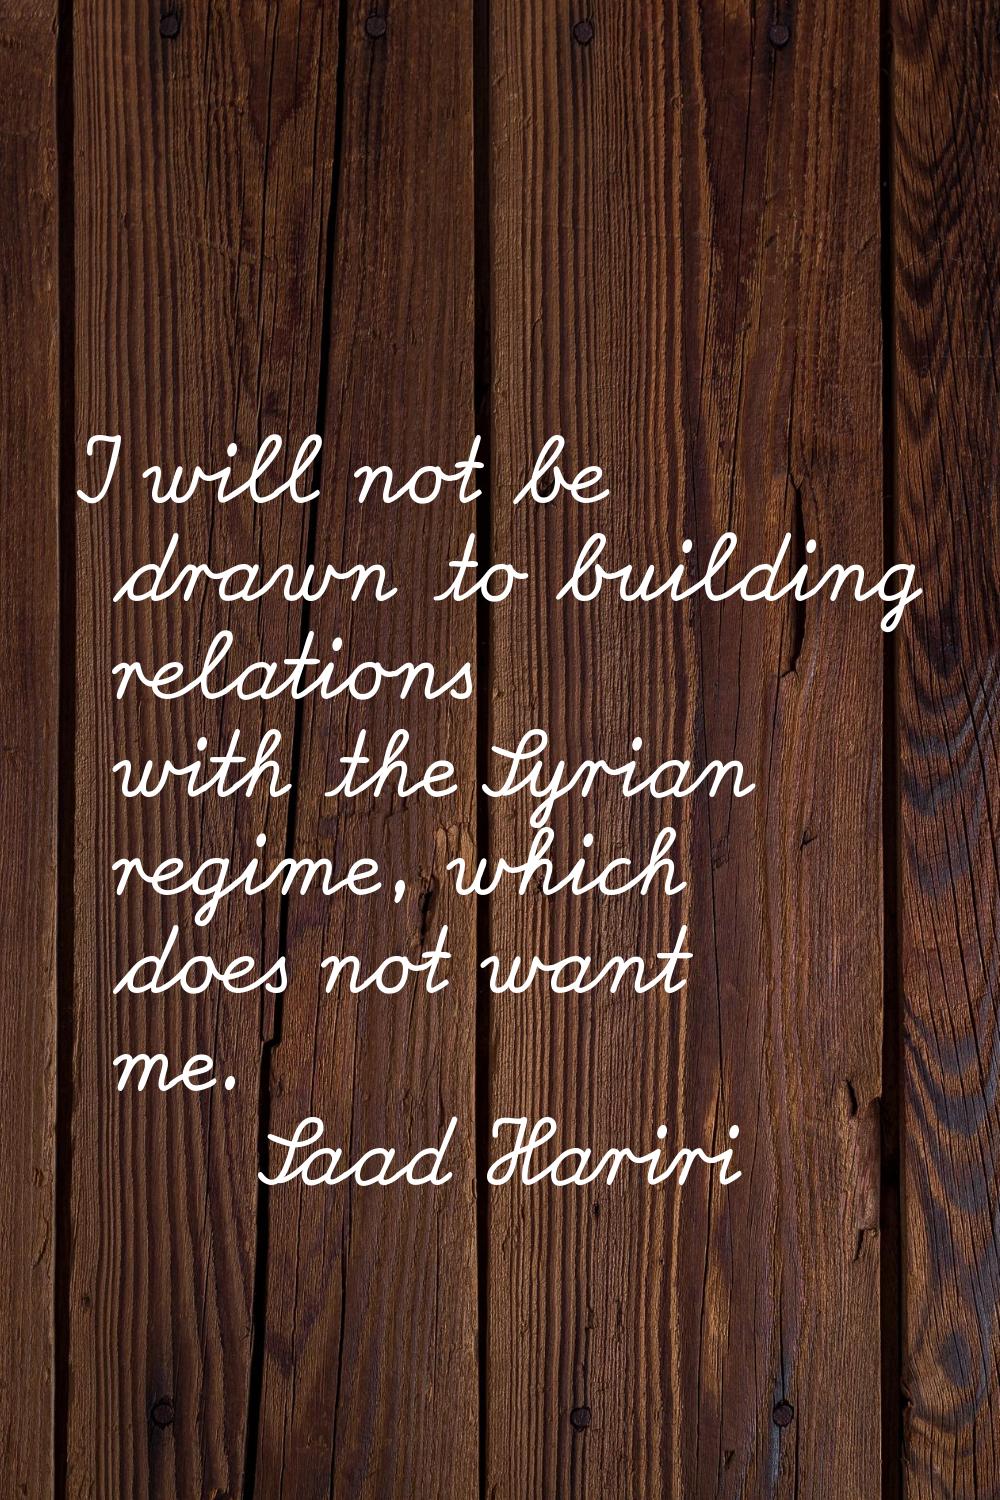 I will not be drawn to building relations with the Syrian regime, which does not want me.